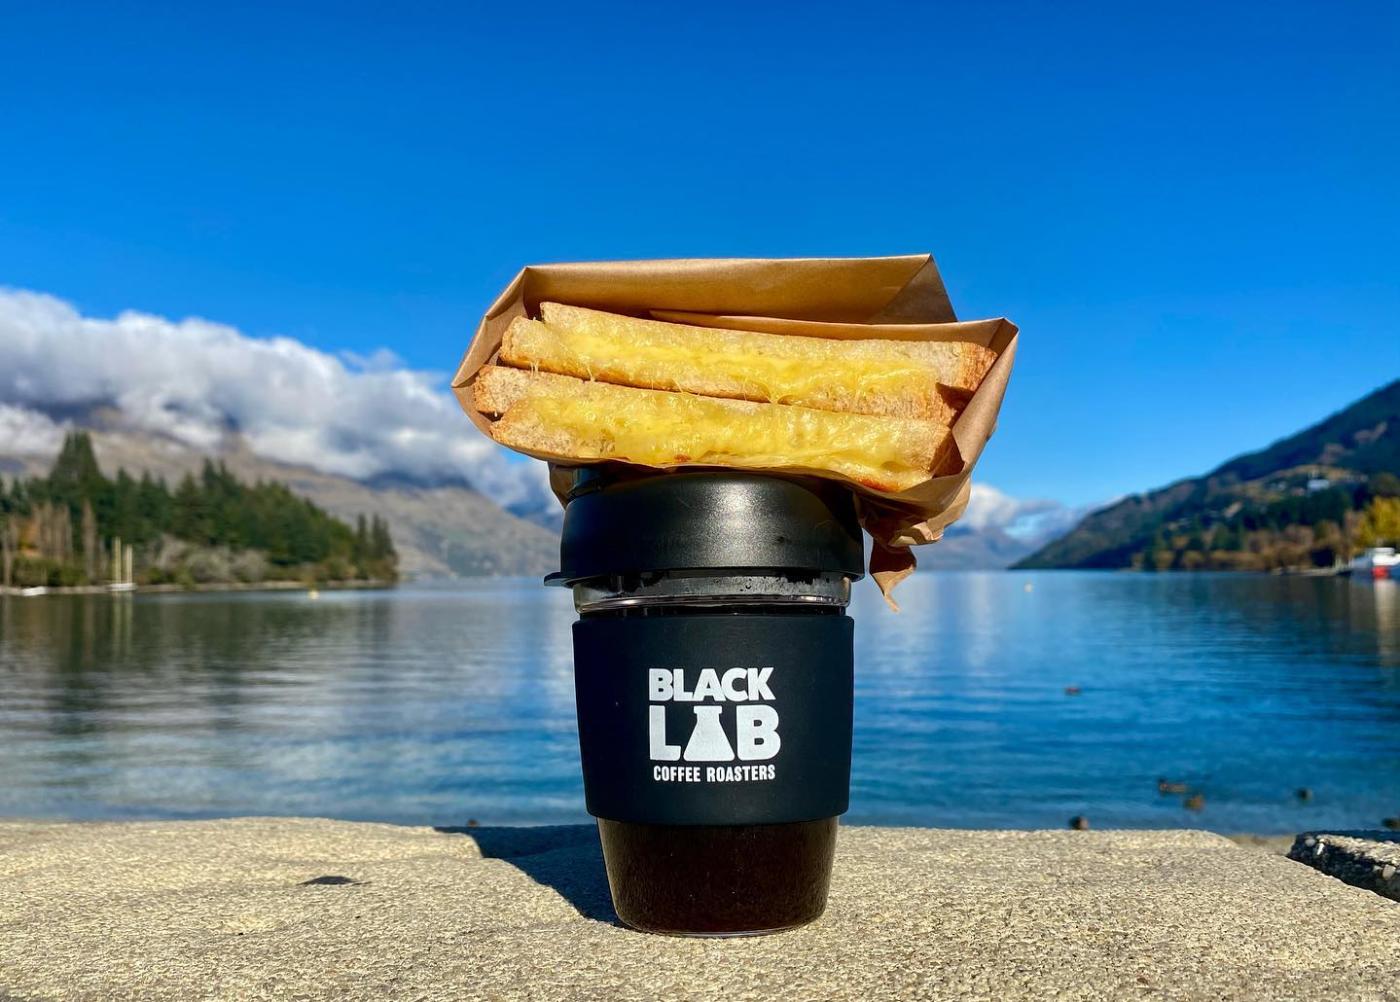 Resuseable coffee cup with whit weiting that reads Black Lab Coffee Roasters with cheese toasty sitting on top of the cup and a view of lake and mountains in the background